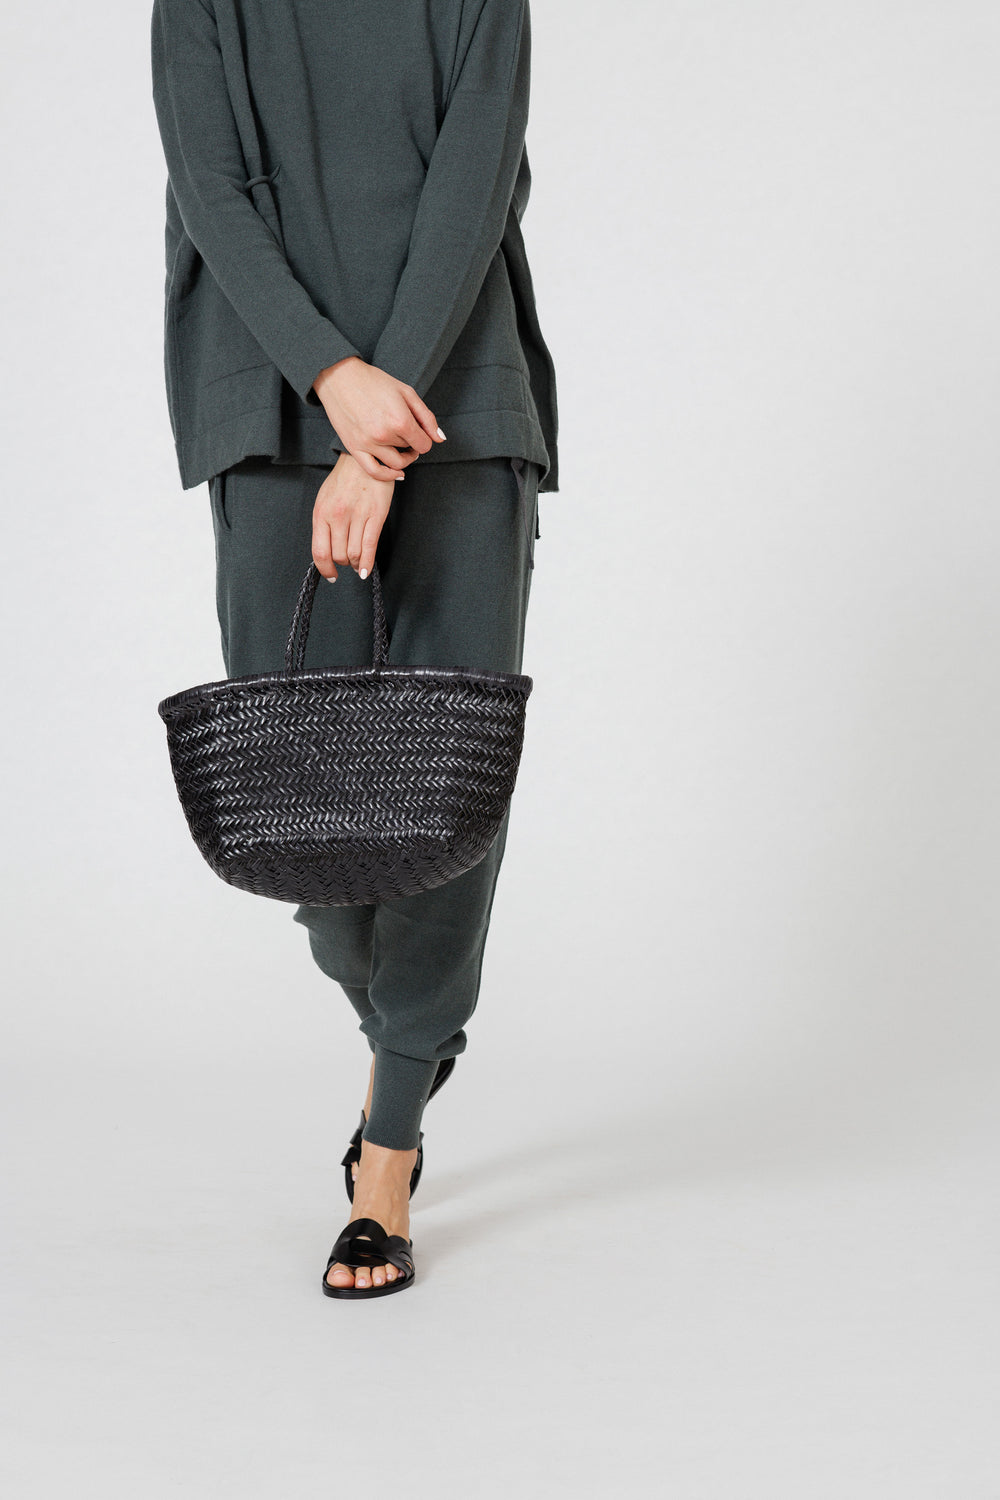 Reviewing my favourite bag from Dragon Diffusion, Gallery posted by  viktorijaB